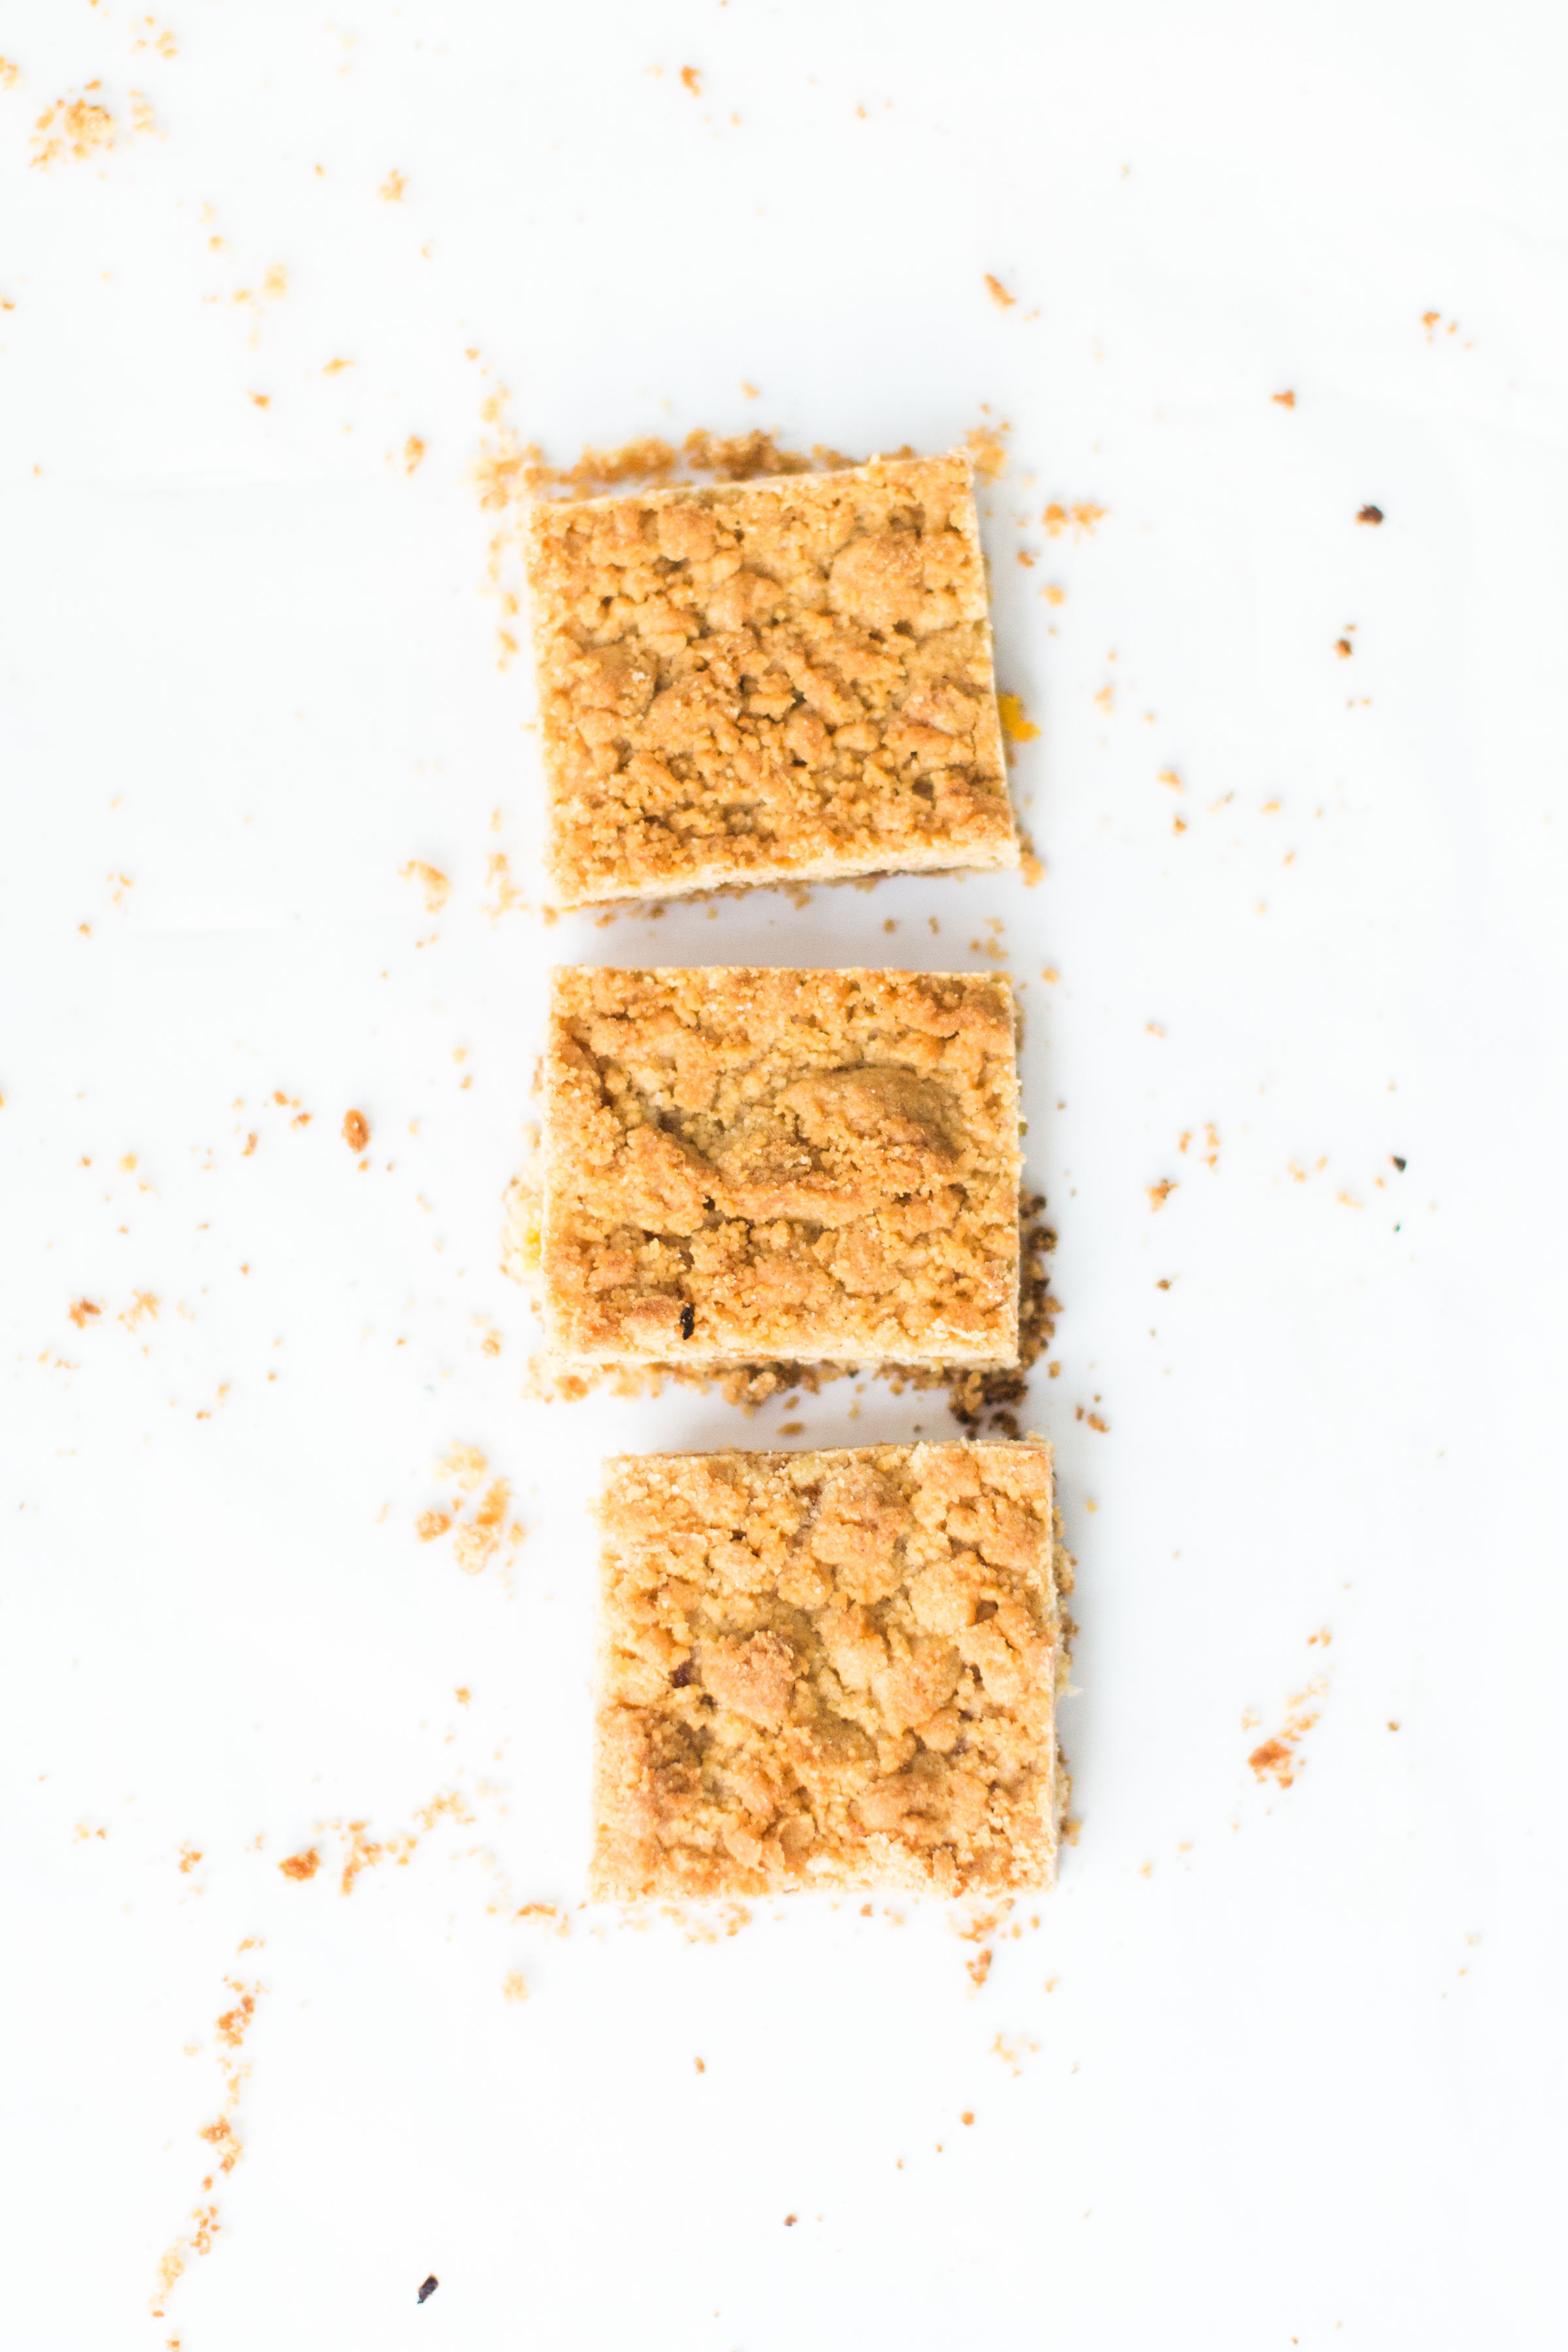 These shortbread crumble jam bars have a delicious shortbread base, a layer of fruity jam, and a buttery, crunchy crumble topping. Perfect for your next brunch or party! Click through for the recipe. | glitterinc.com | @glitterinc 